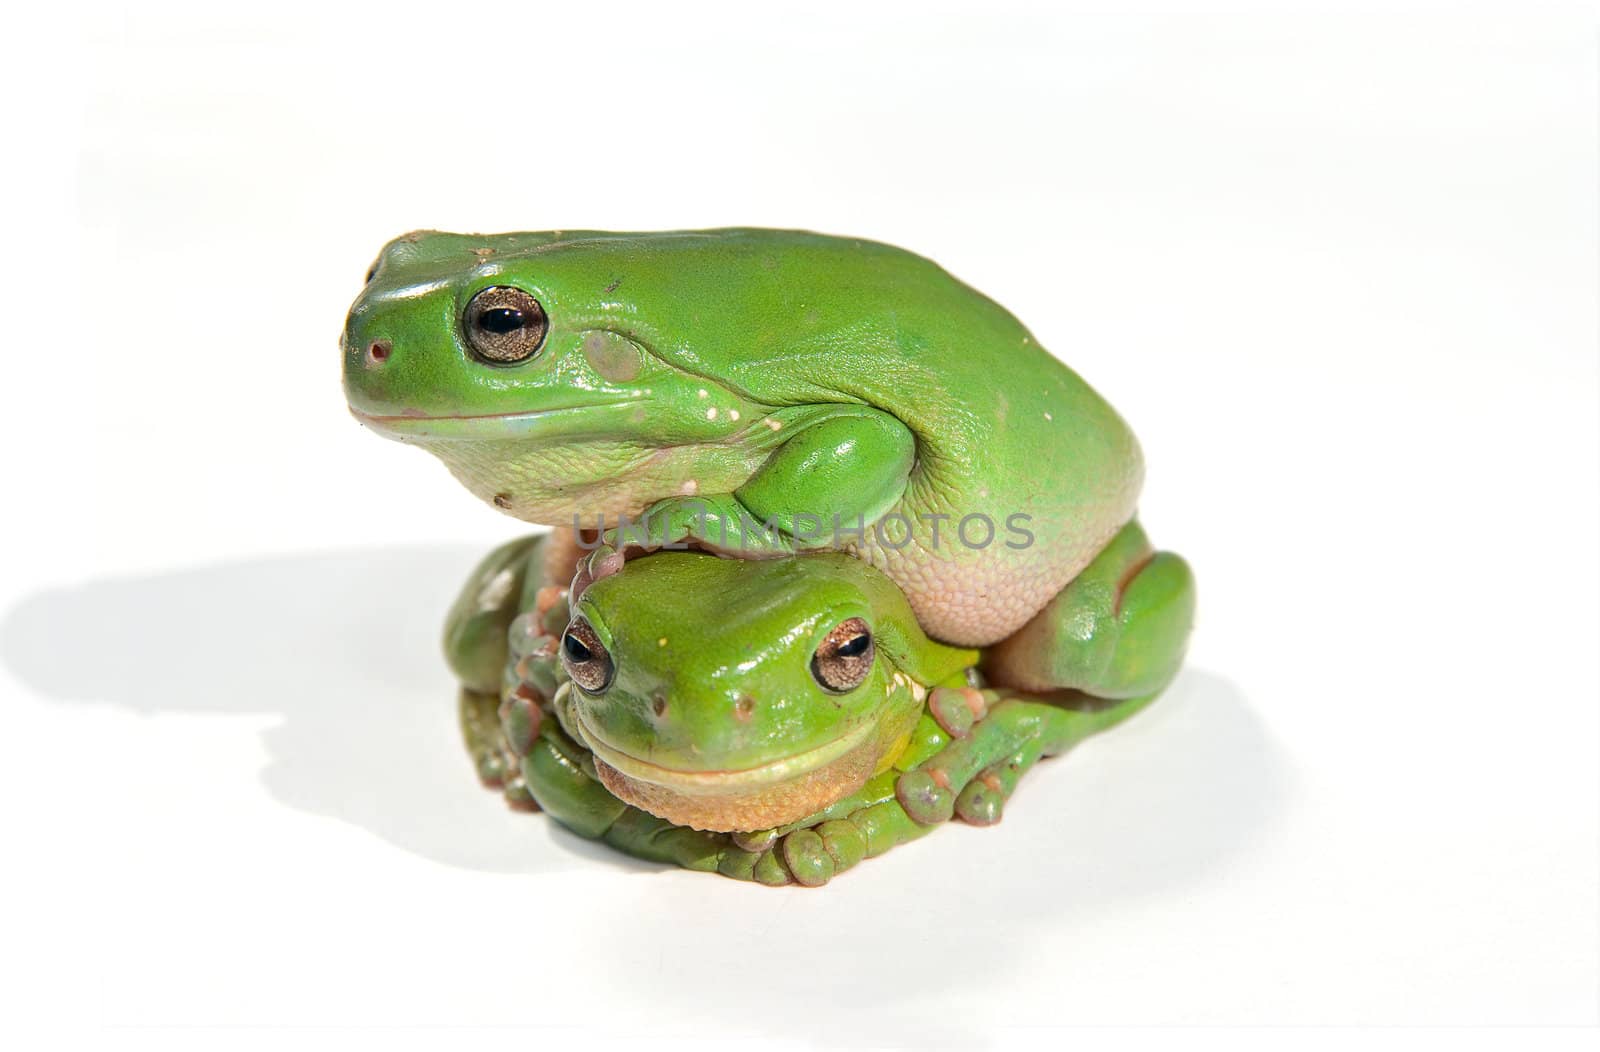 two litoria caerula - green tree frogs one on top of the other - on white